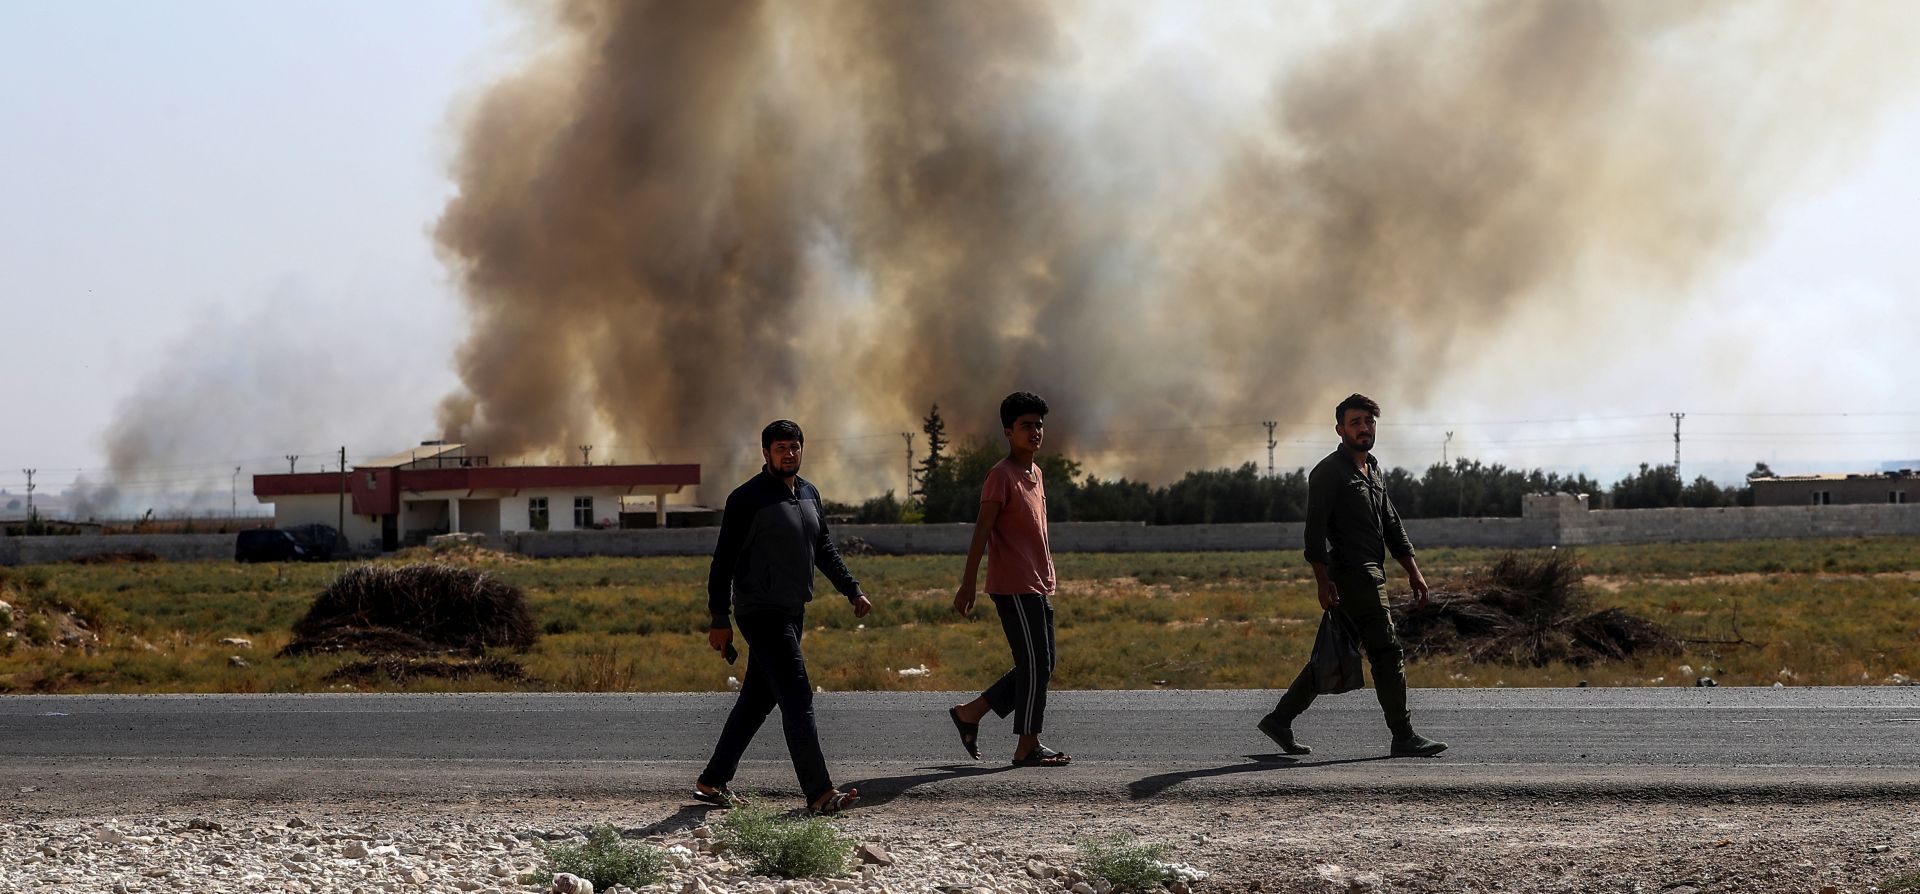 epa07917132 People walk near Turkish-Syria border as smoke rises from targets inside Syria during bombardment by Turkish forces at Tal Abyad town as seen from in Akcakale district in Sanliurfa, Turkey, 13 October 2019. Turkey has launched an offensive targeting Kurdish forces in north-eastern Syria, days after the US withdrew troops from the area.  EPA/SEDAT SUNA